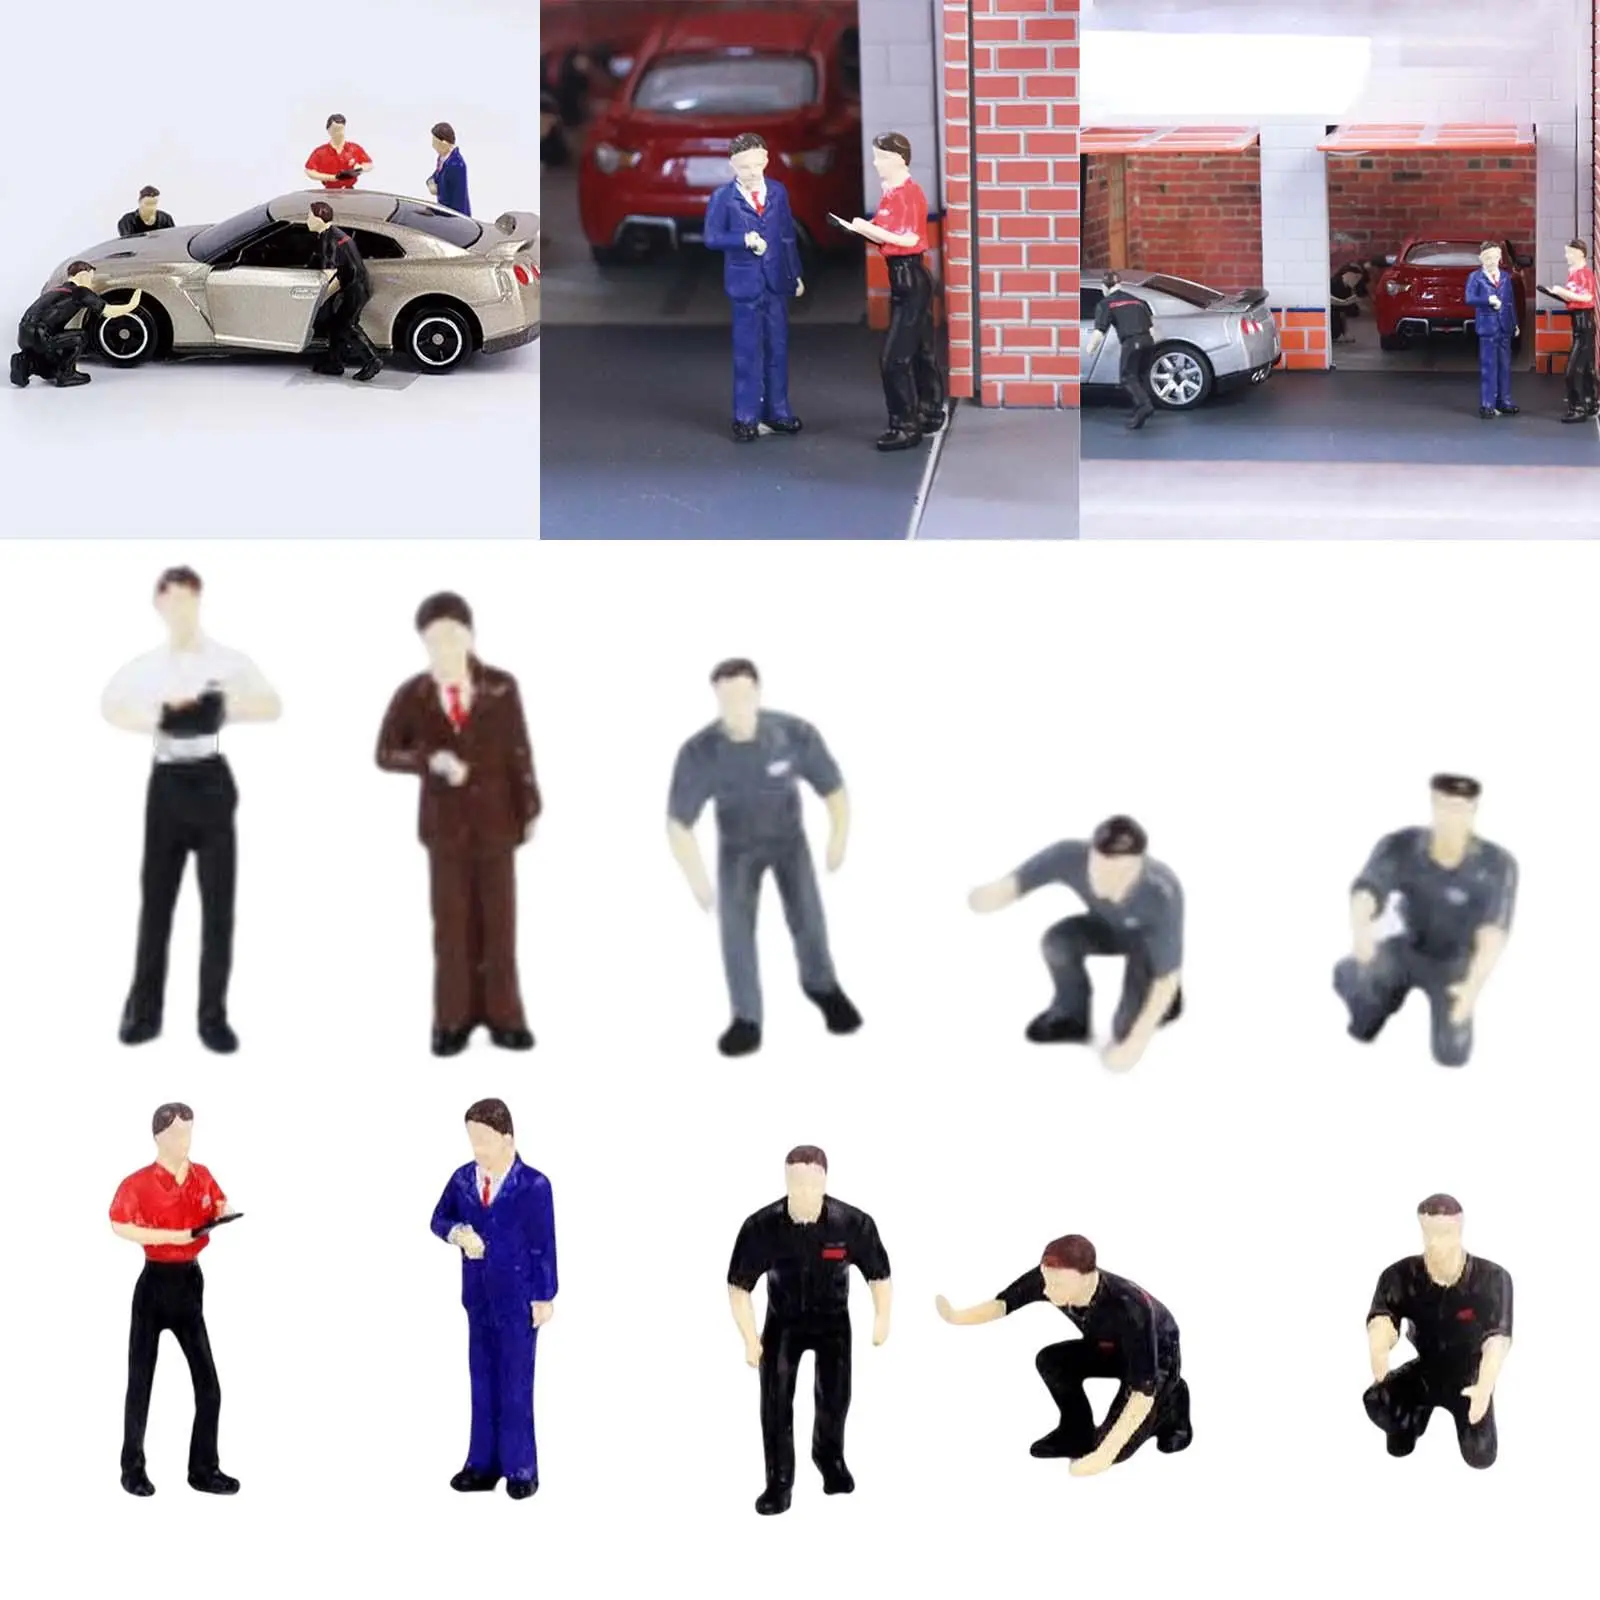 5Pcs Hand Painted 1/64 Repairman Figures People Model Layout Miniature Scenes Diorama Scenery Movie Props S Scale Ornaments